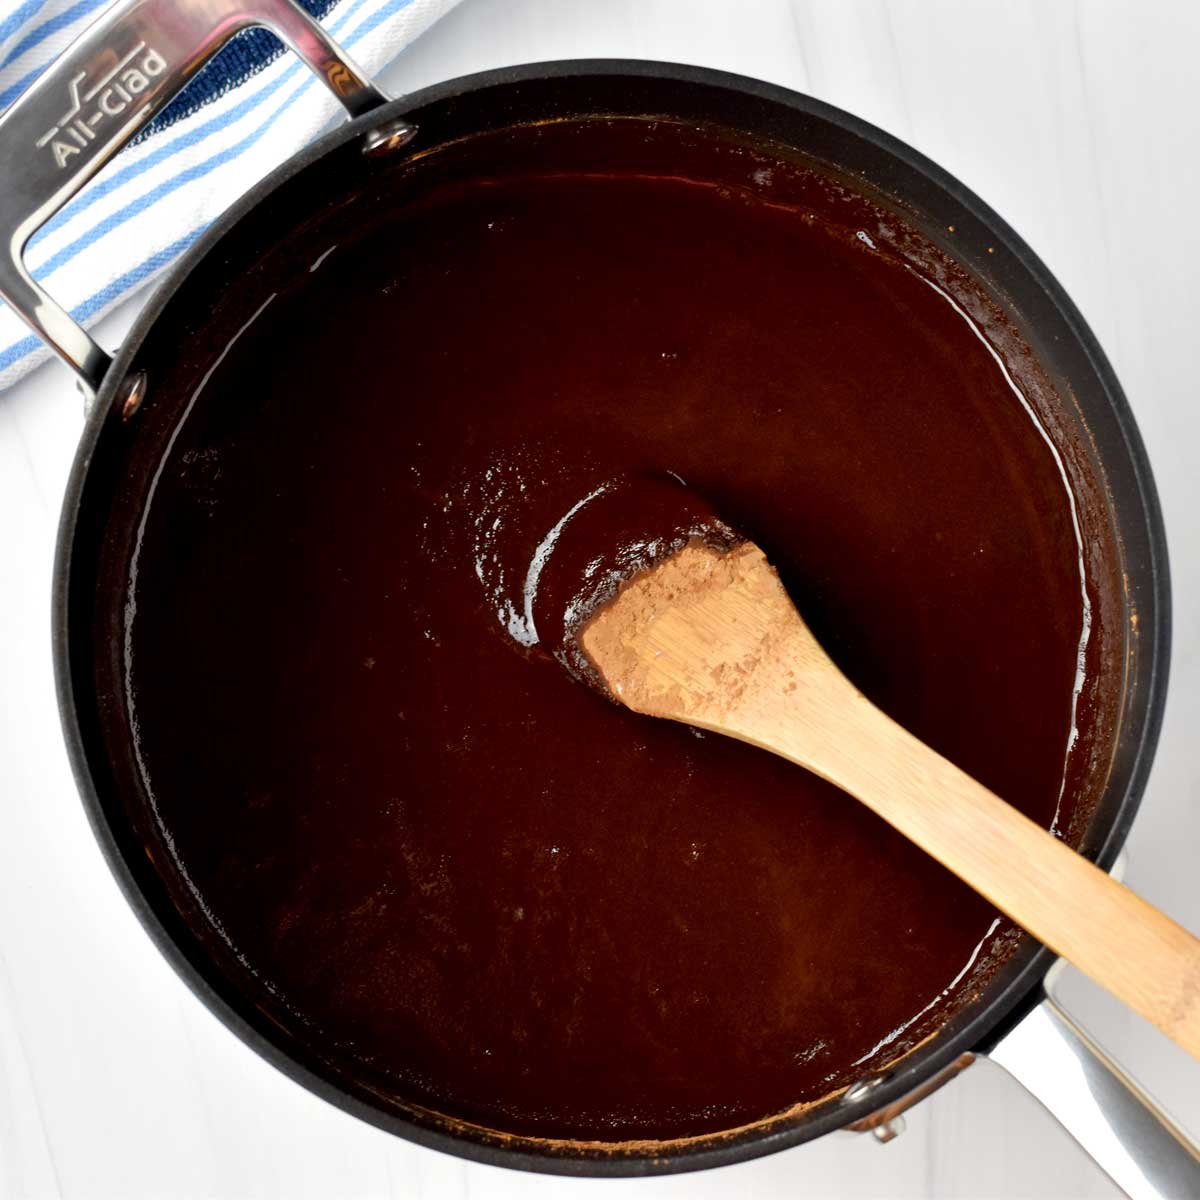 Brownie batter in saucepan before the eggs and flour have been added.